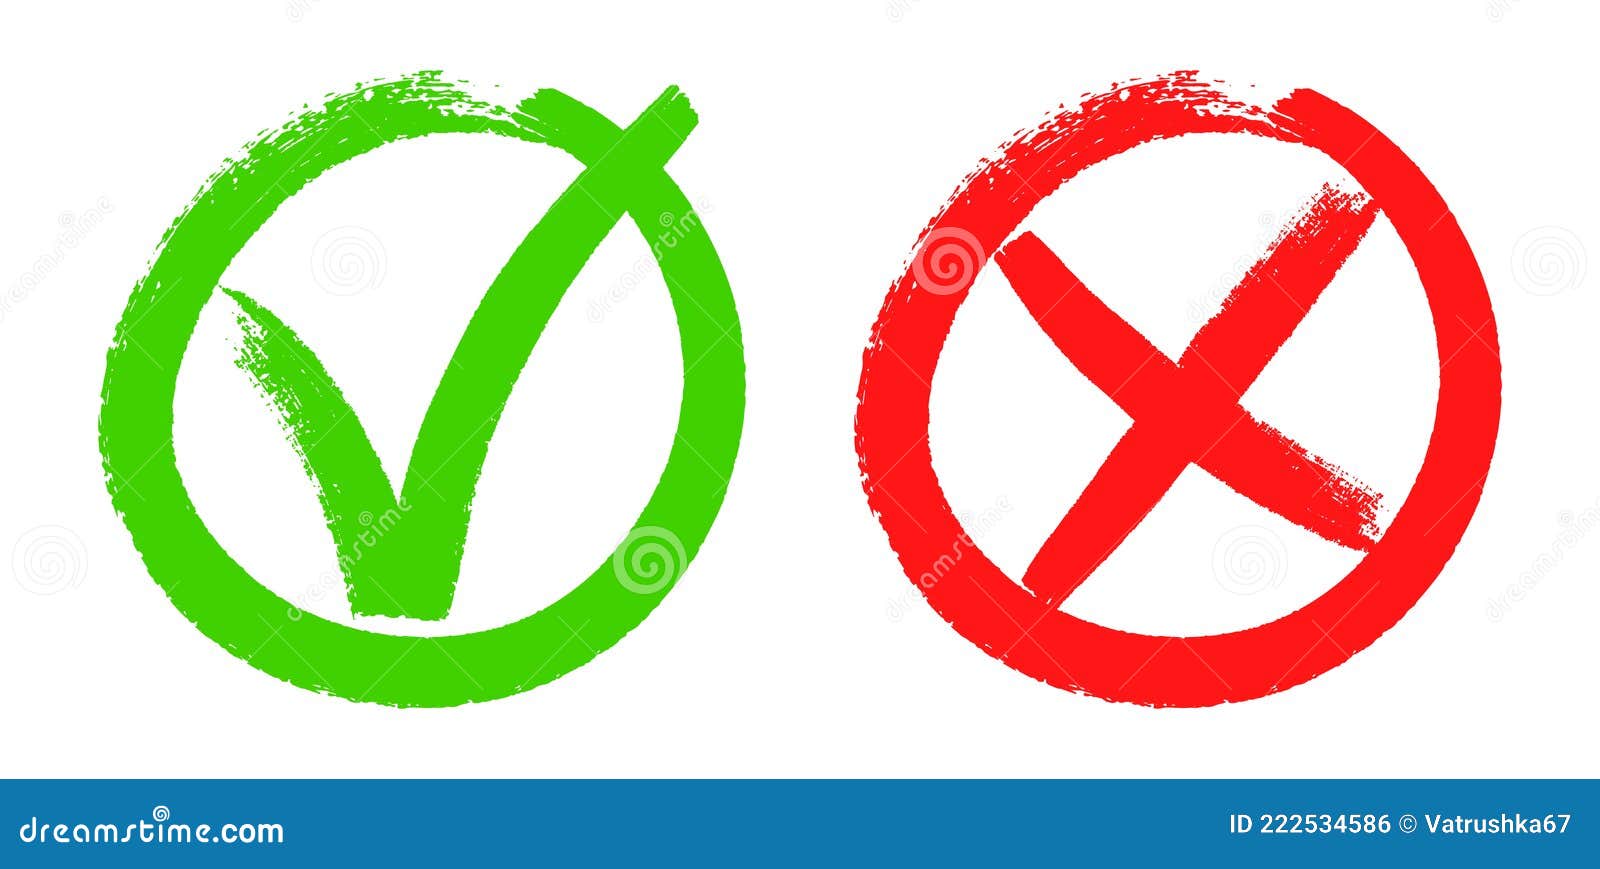 doodle checkmarks. grunge brush stroke tick and cross signs. green v mark, red x sign. yes or no checklist marks in